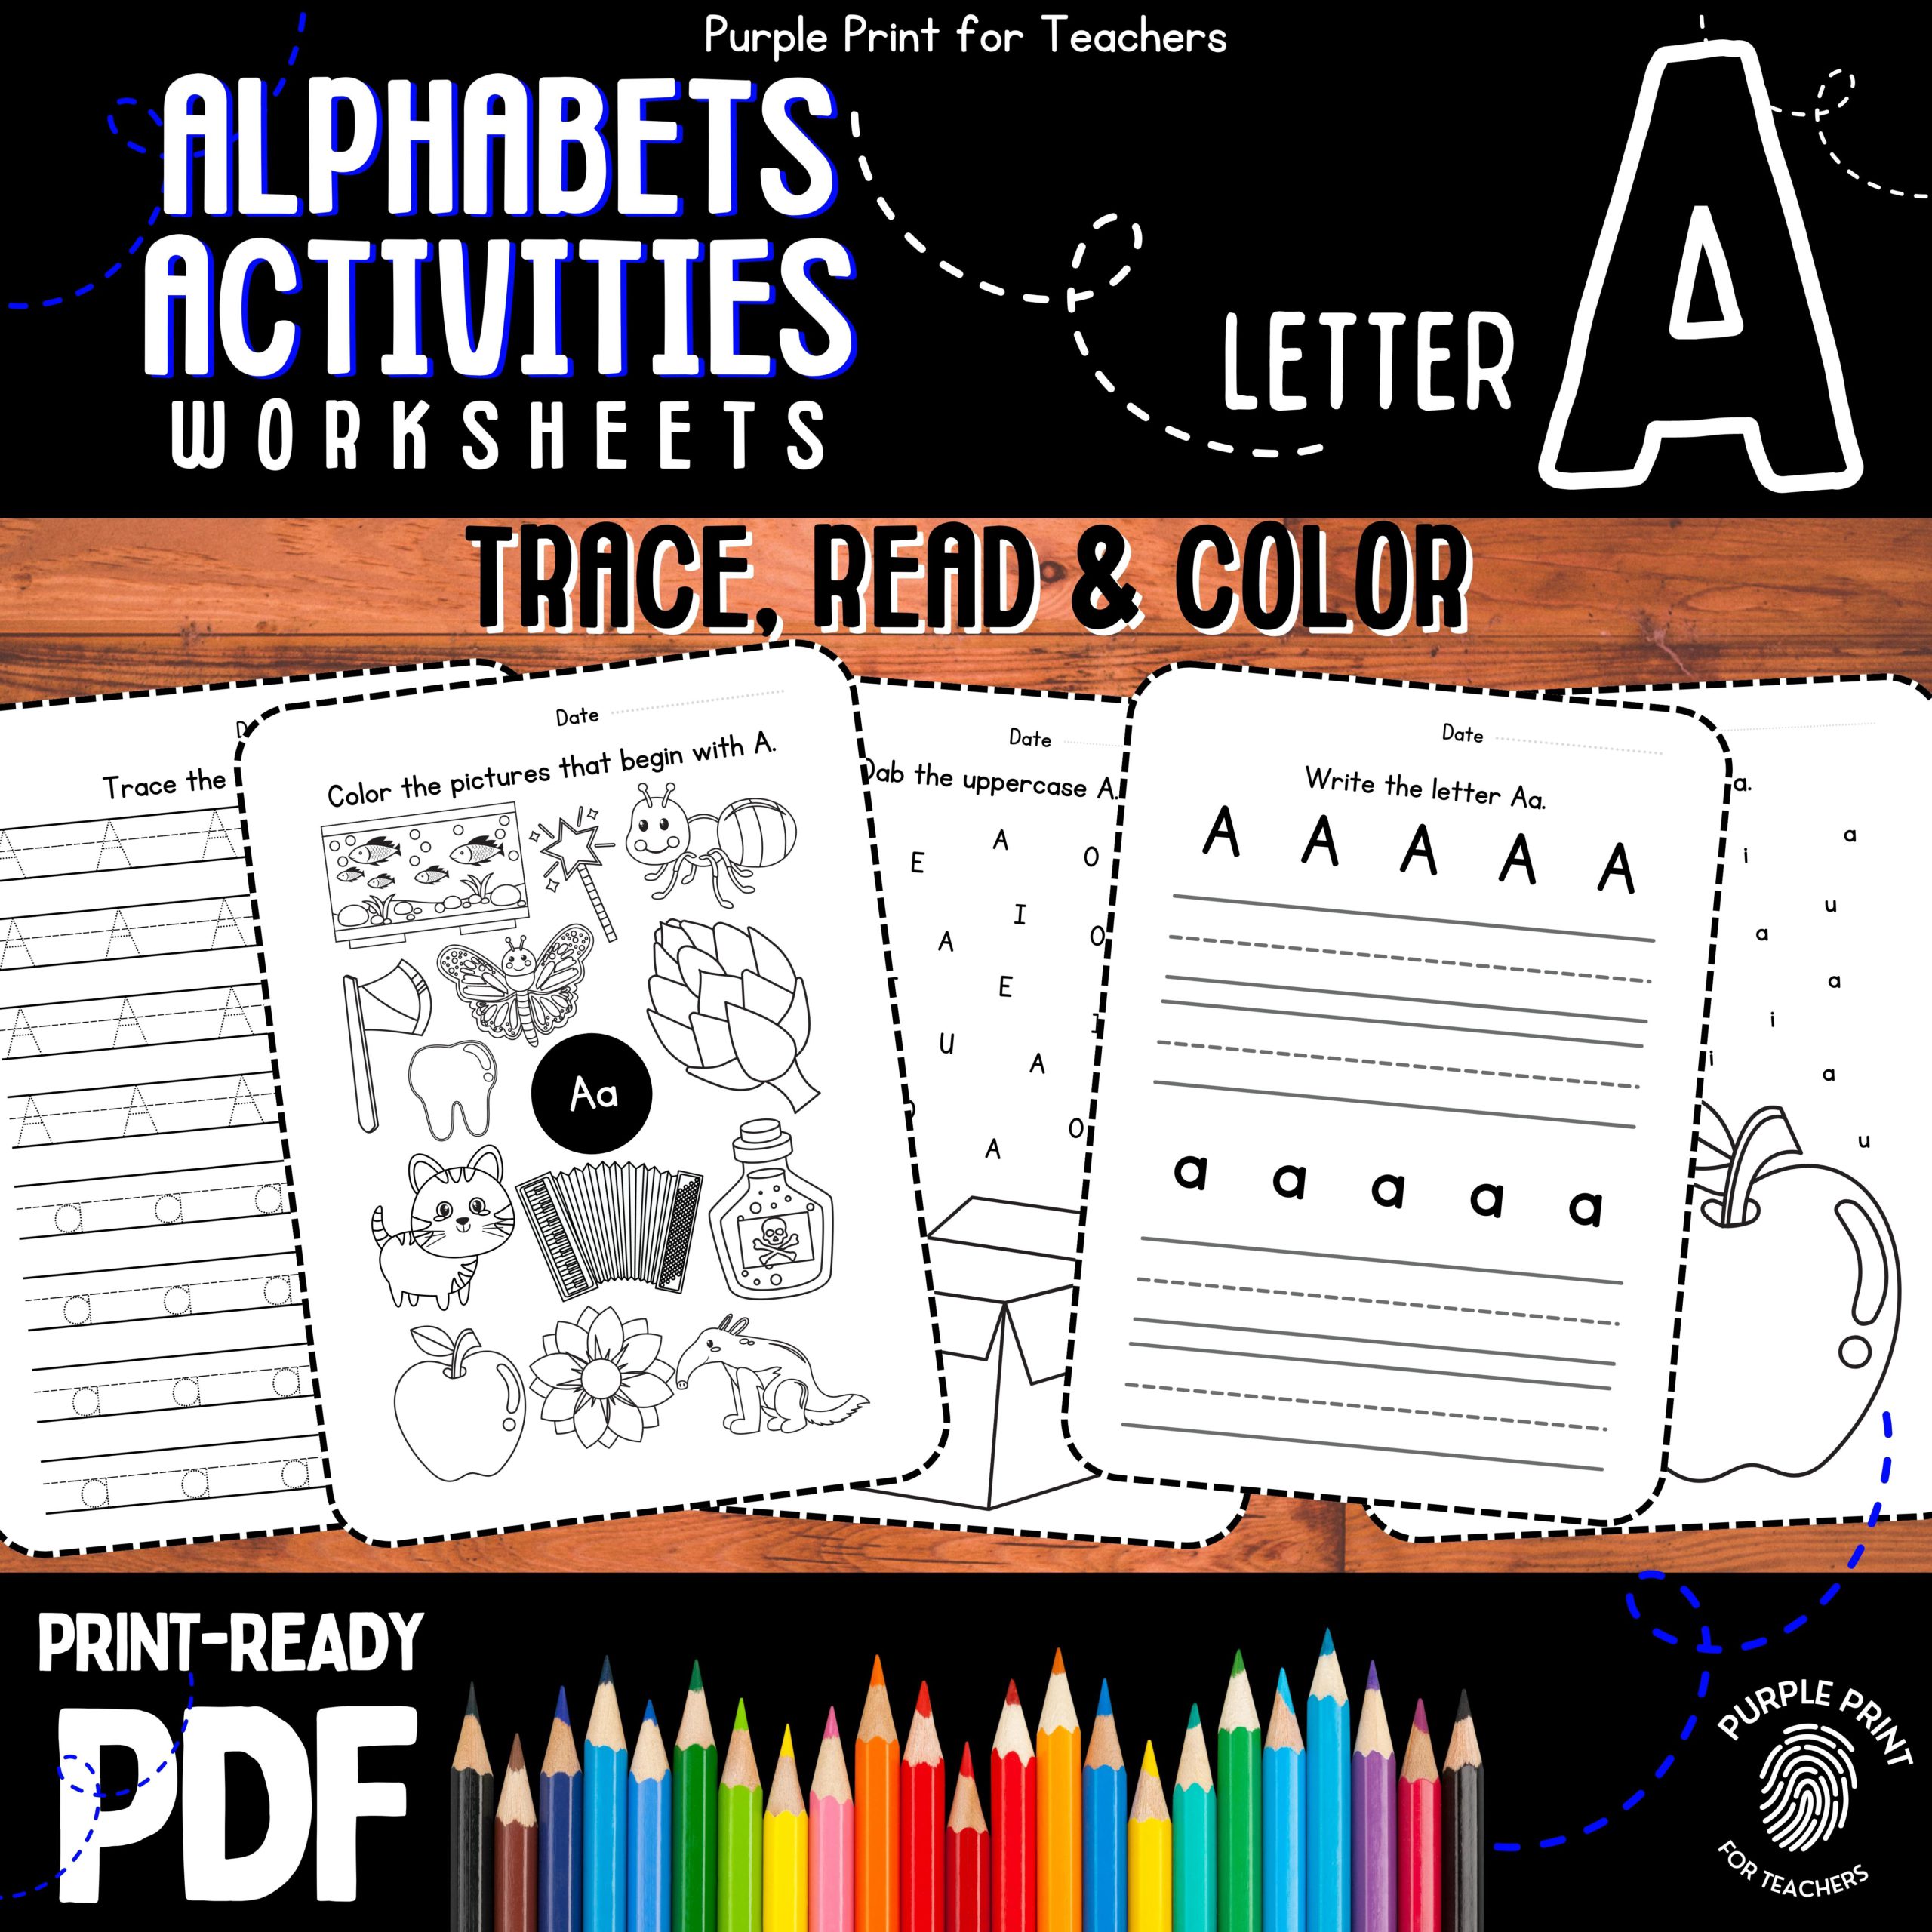 Alphabet Printable Activities, Worksheets, Coloring Pages and Games